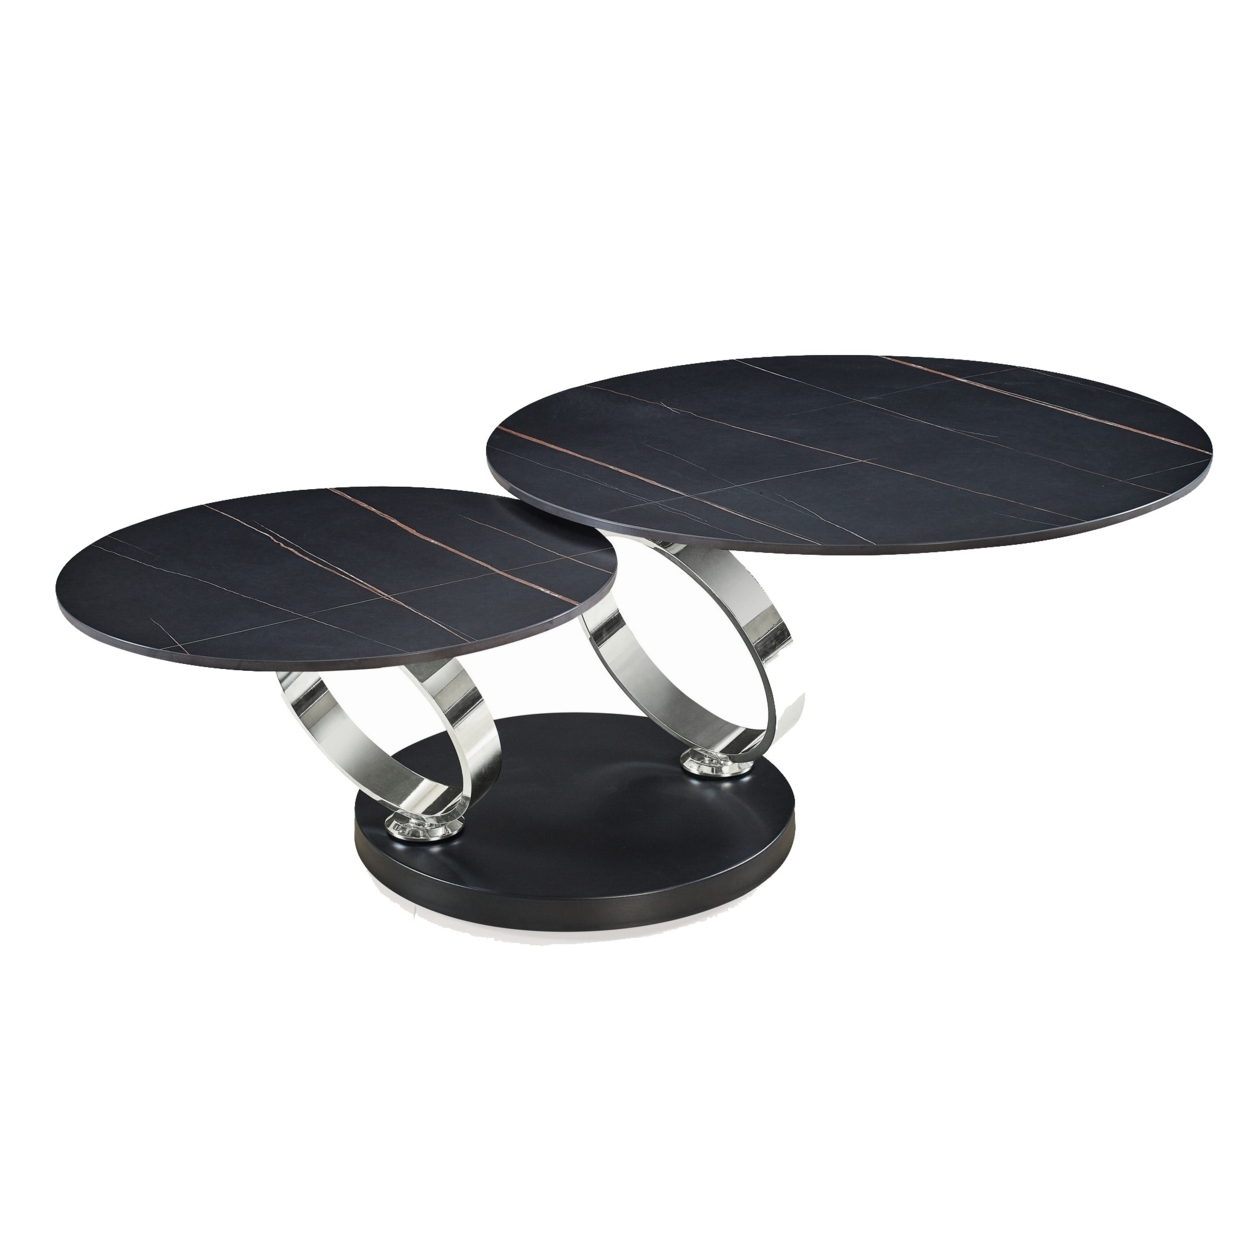 Dual Ceramic Top Coffee Table With Motion Mechanism, Black And Silver- Saltoro Sherpi